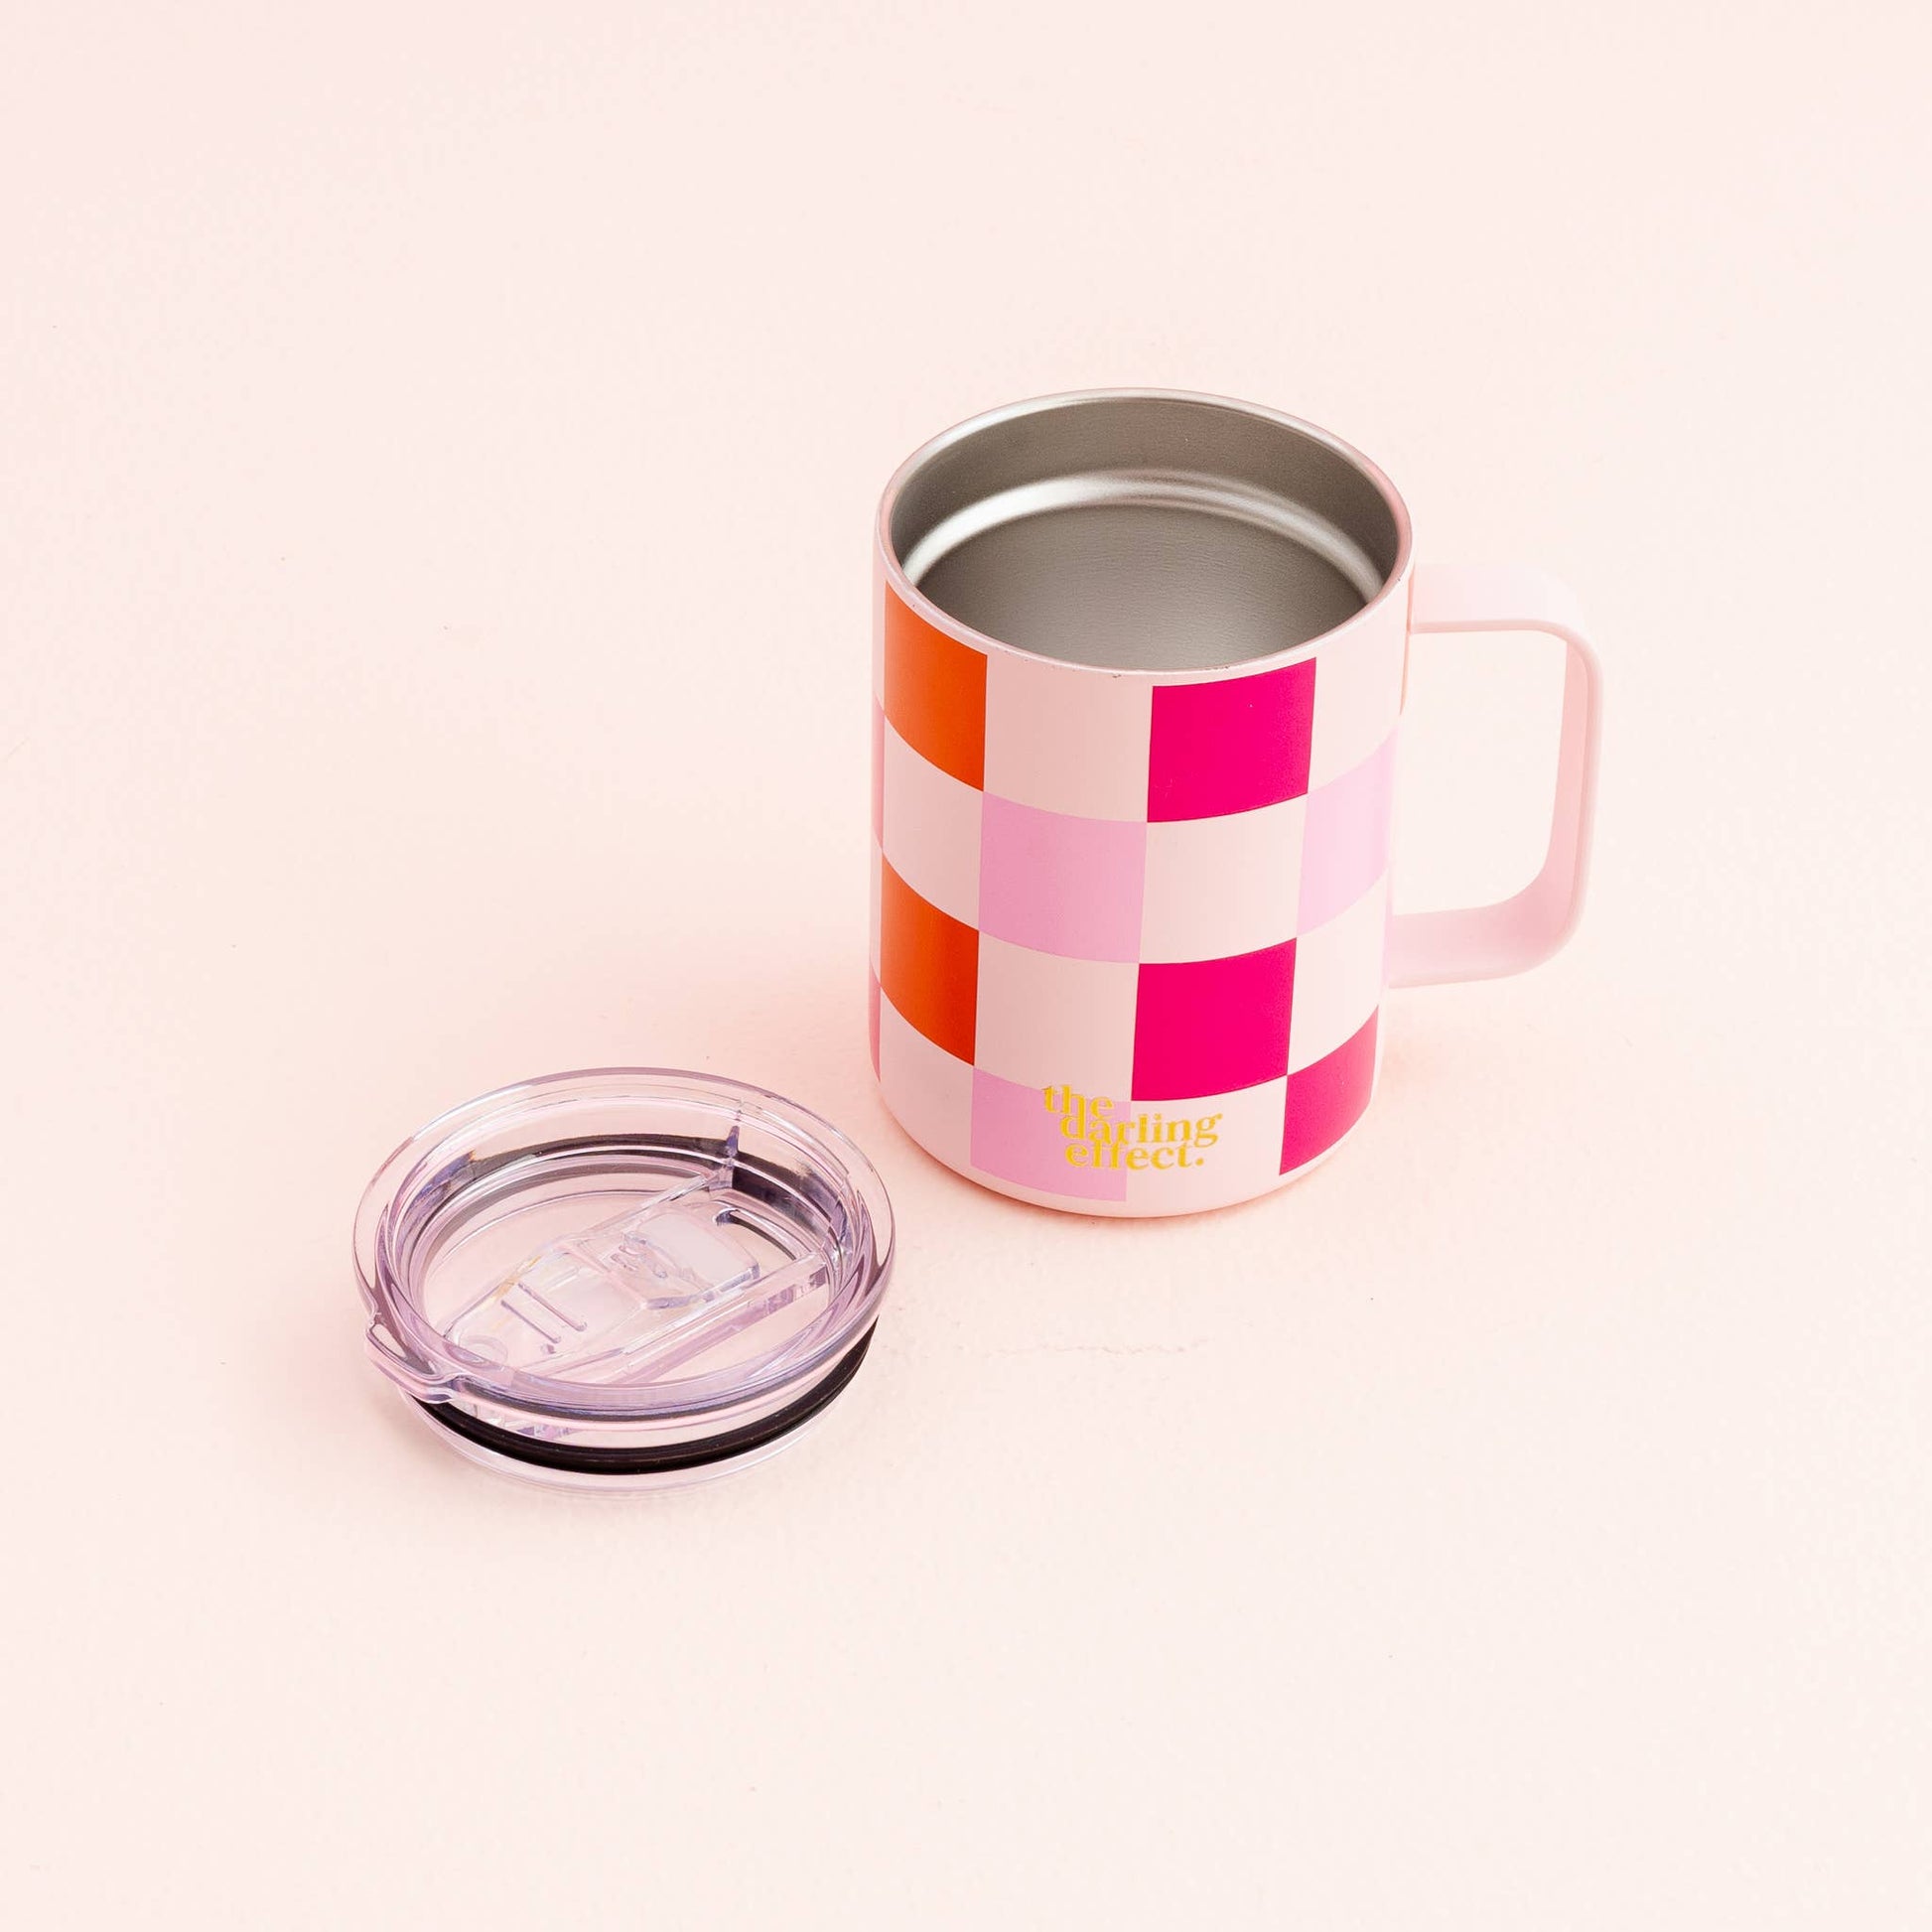 sweetheart check insolated mug with its lid set next to it on a white background.